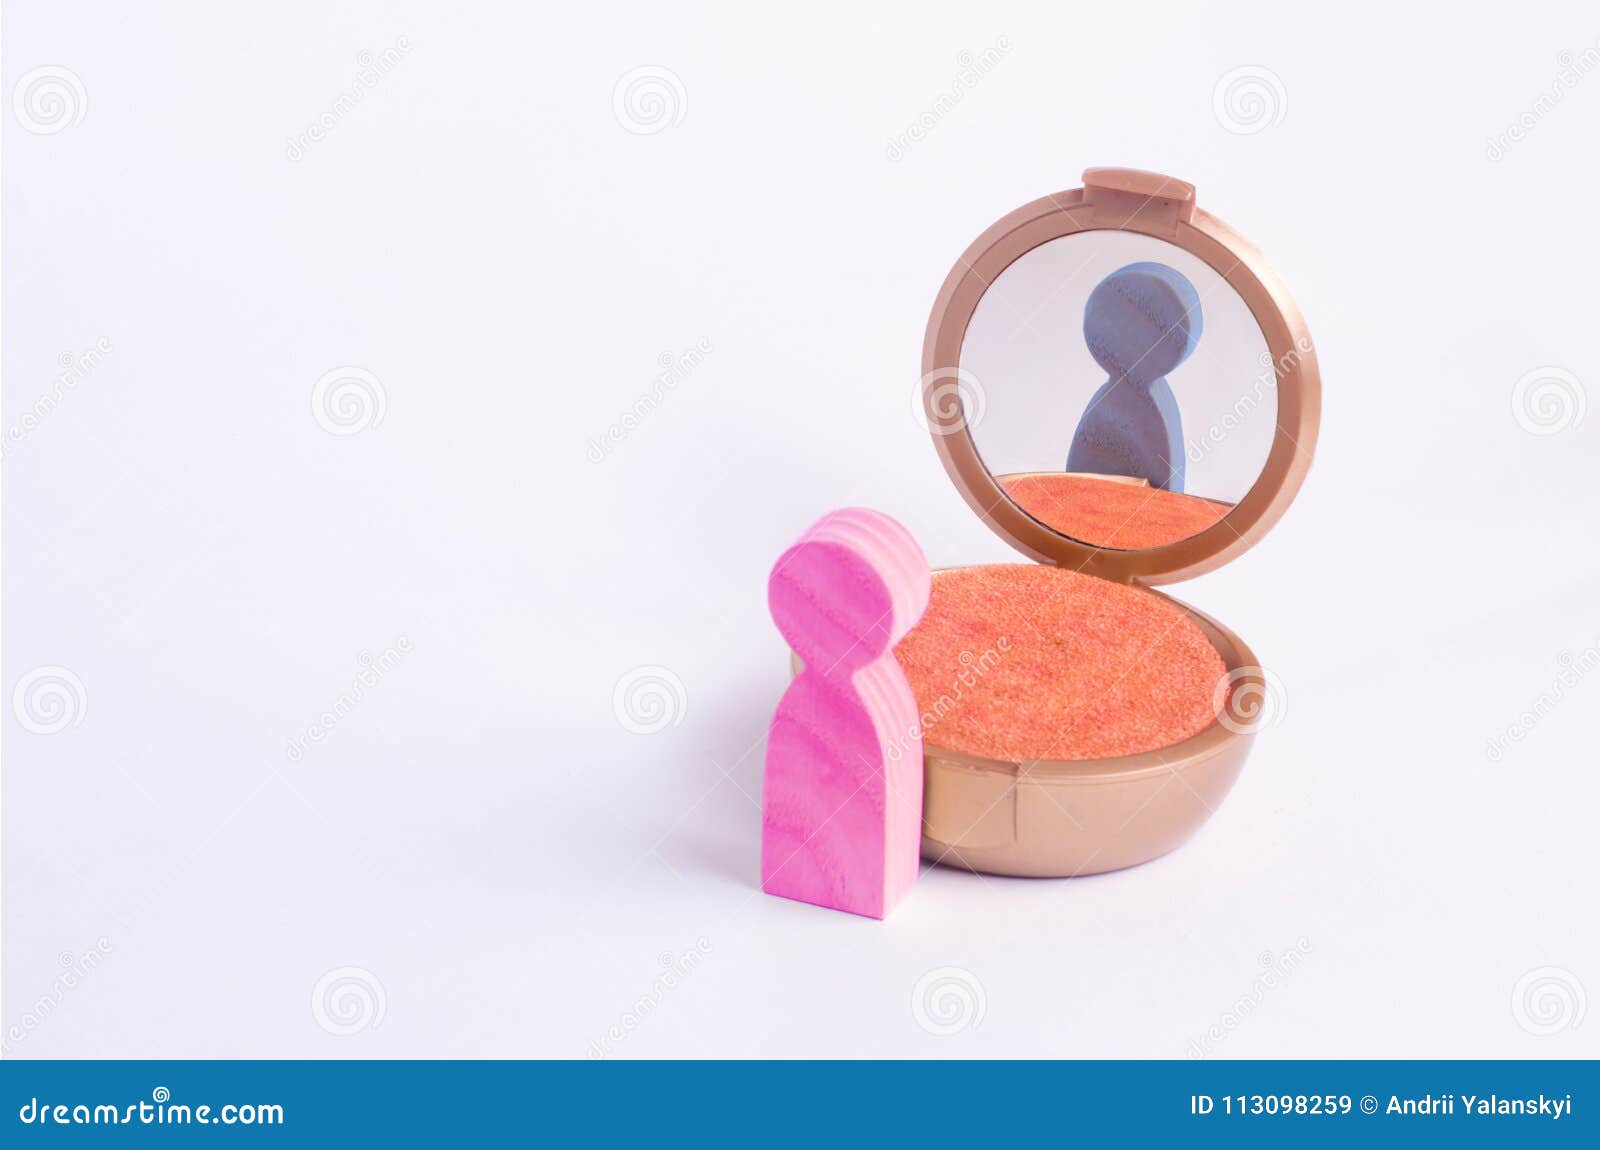 a miniature figure of a man looks in the mirror and sees his hatching in another gender. the concept of gender identity.